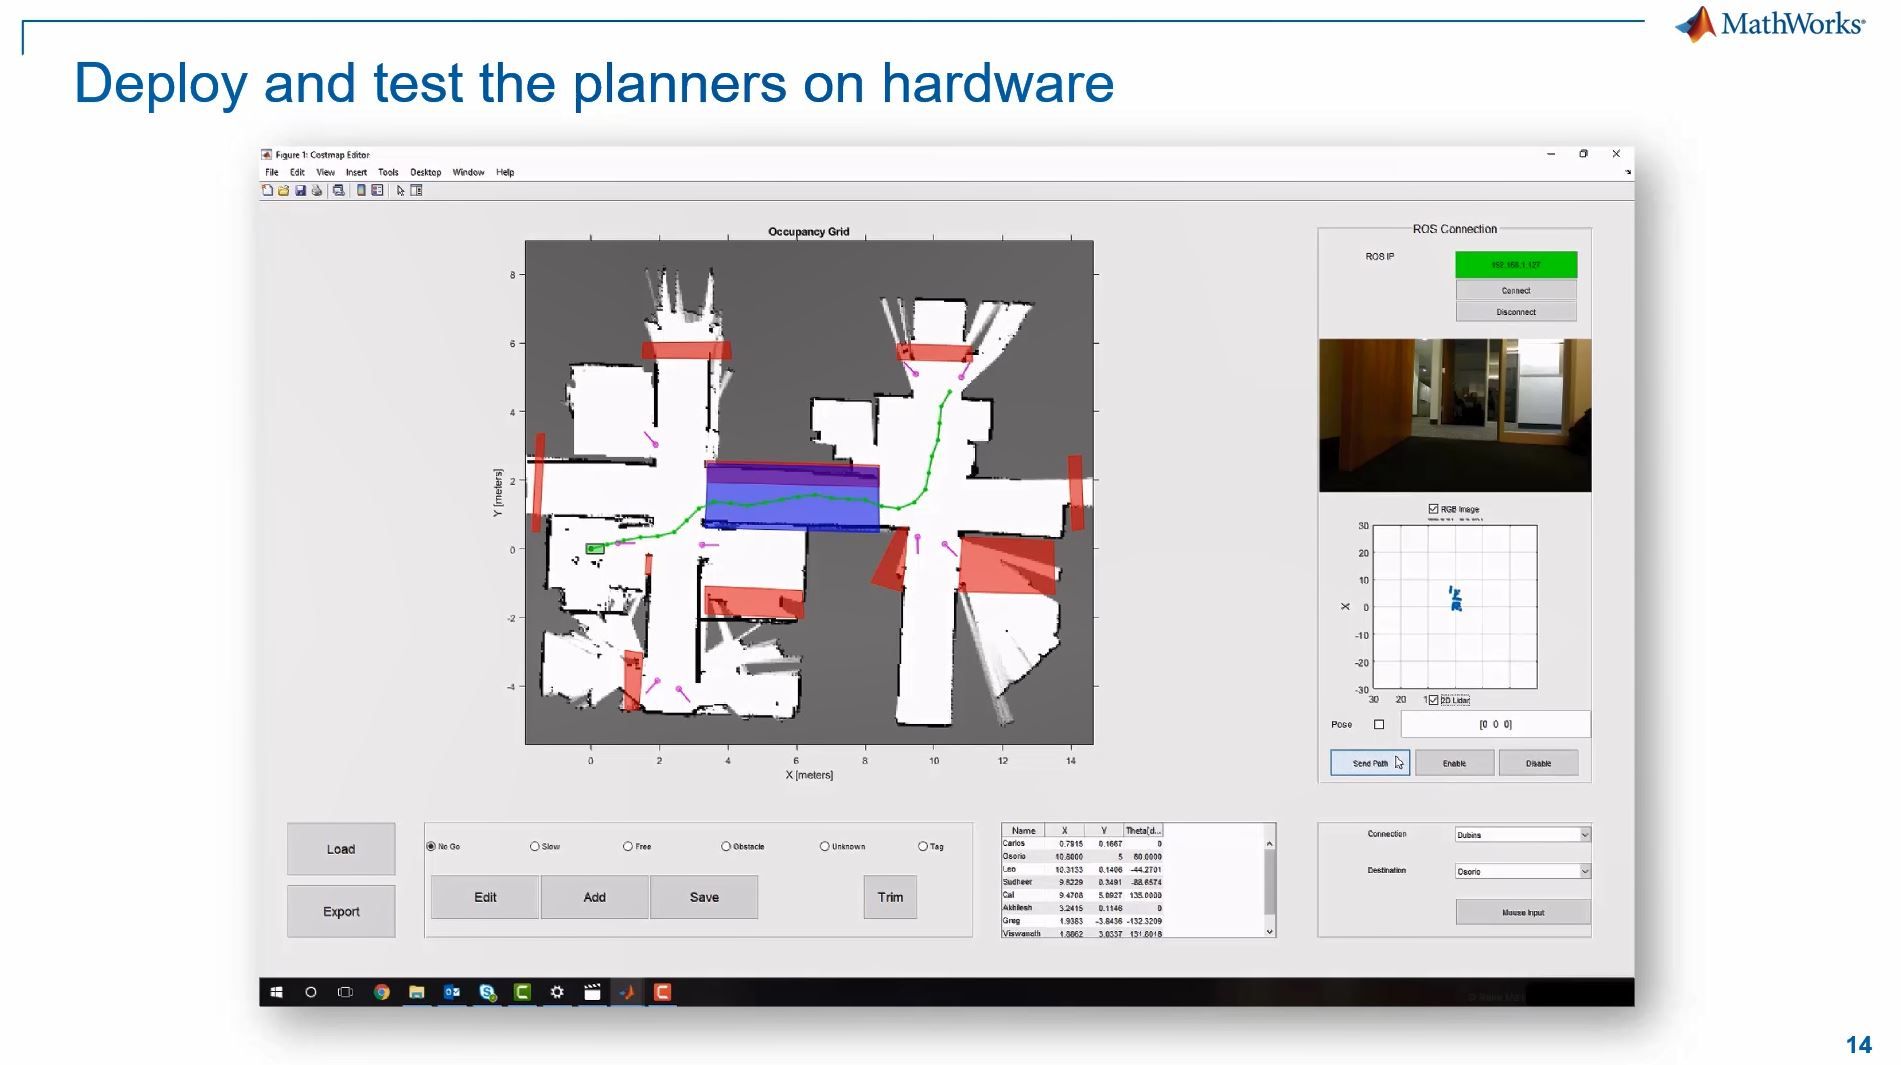 Learn how to use the rapidly-exploring random tree (RRT) algorithm to plan paths for mobile robots through known maps. Watch how to tune the planners with custom state spaces and motion models.